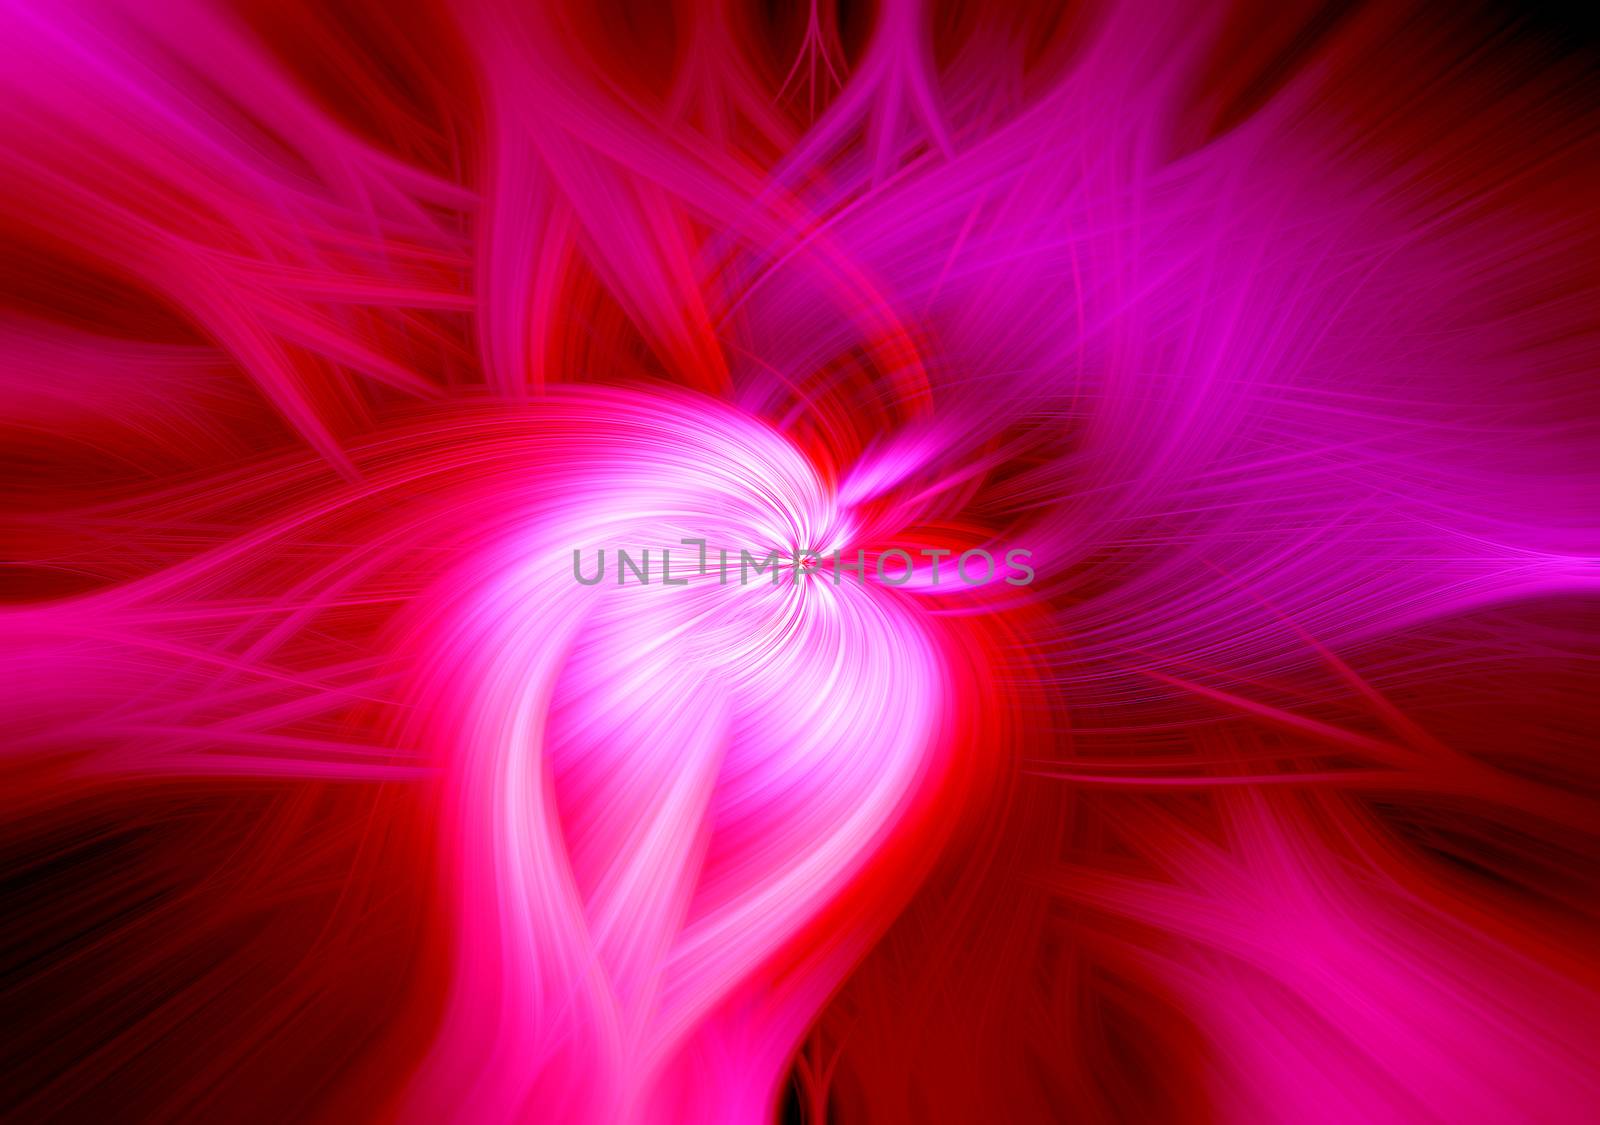 Beautiful abstract intertwined 3d fibers forming a shape of sparkle, flame, flower, interlinked hearts. Pink, purple, maroon and red colors. Illustration. by DamantisZ